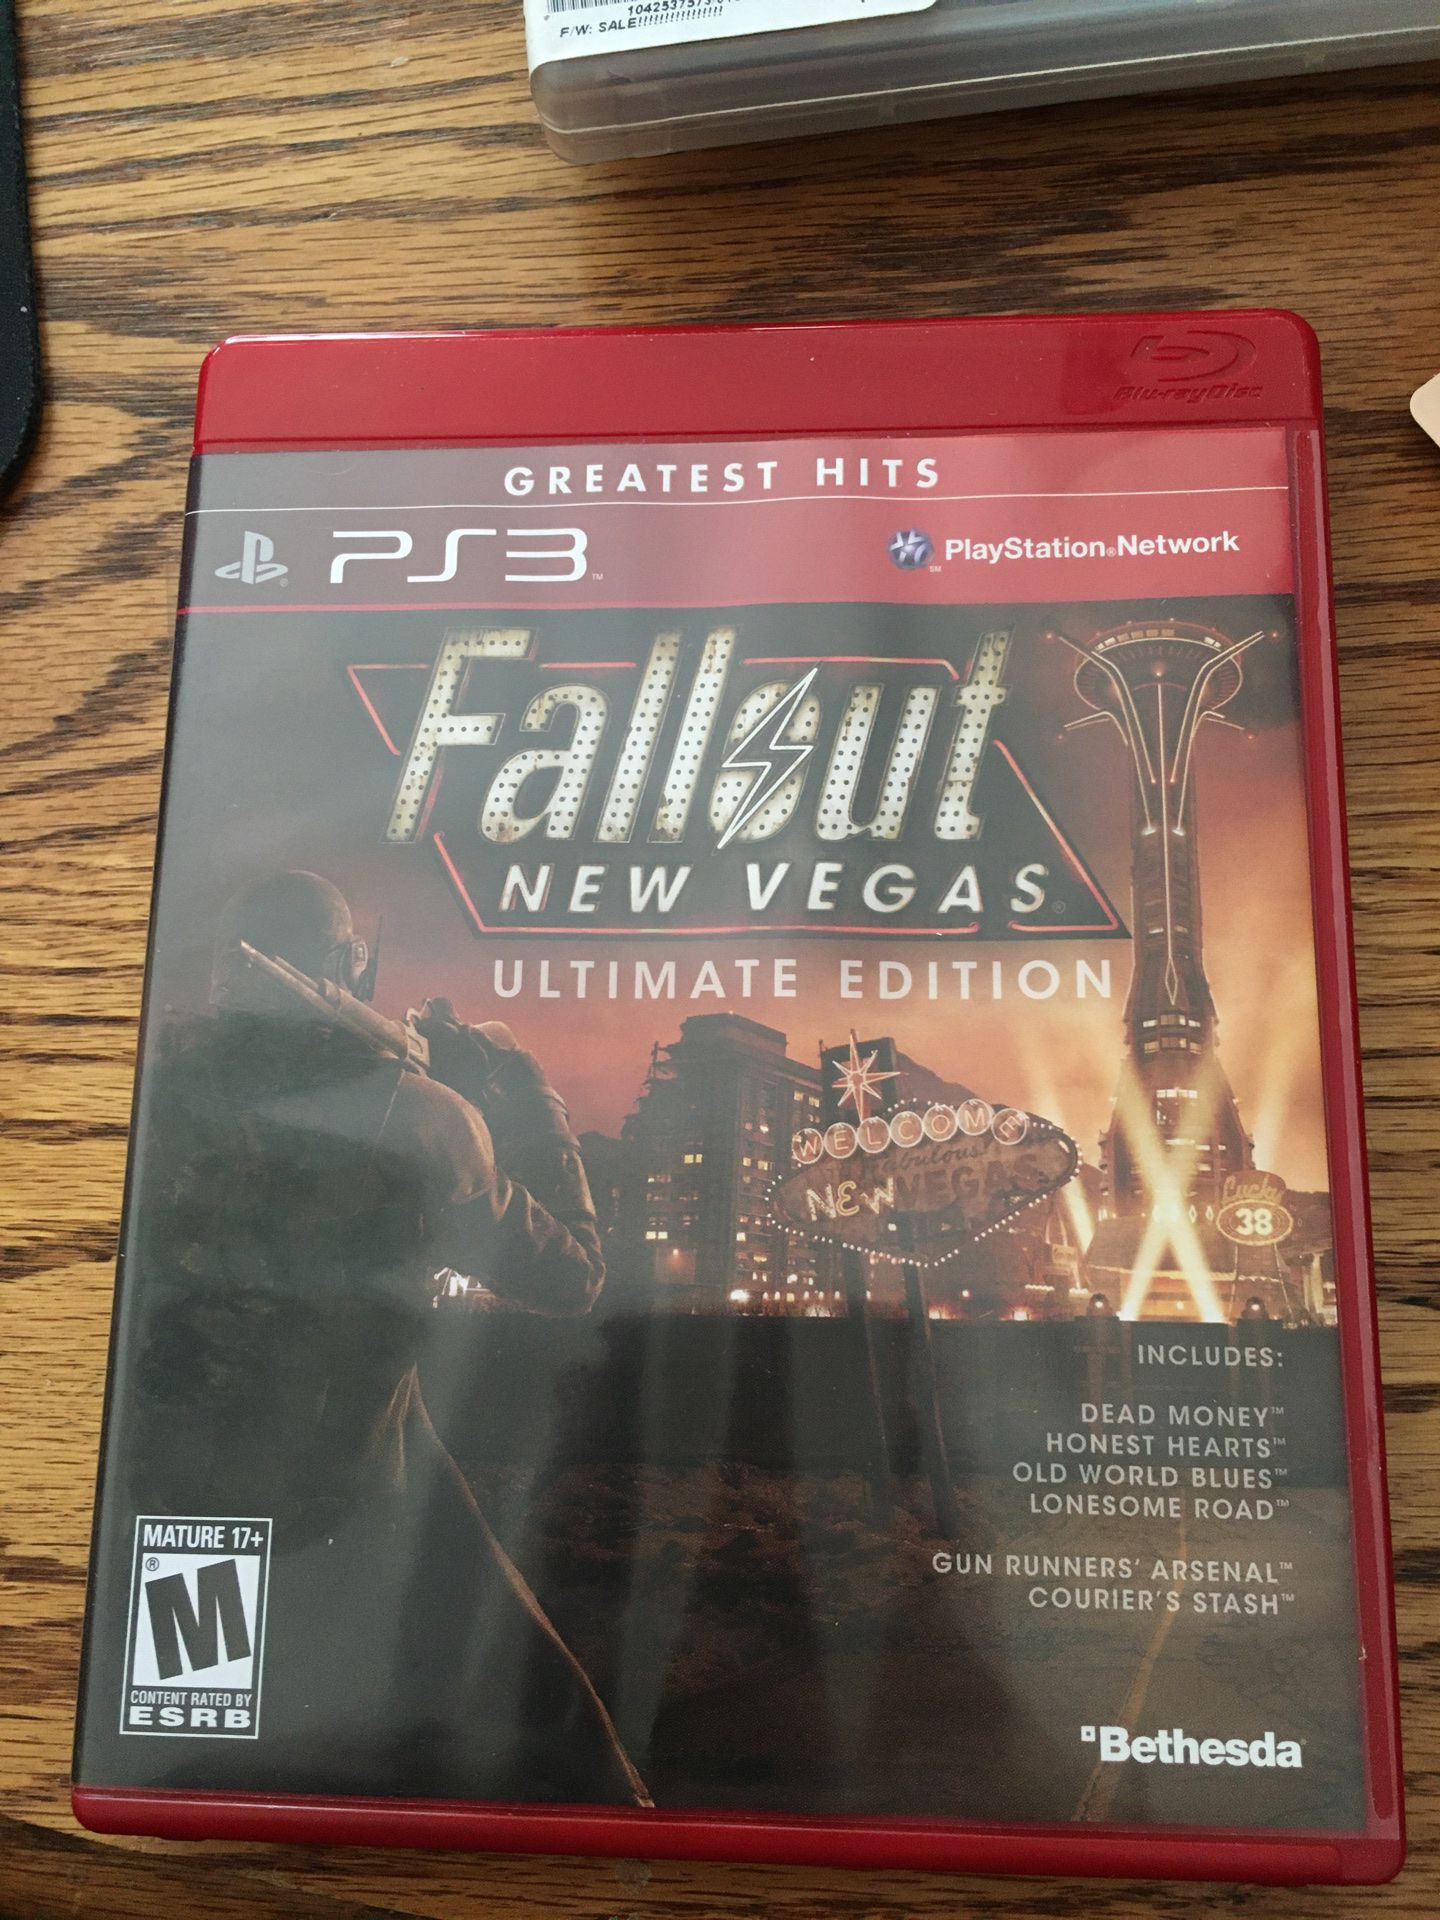 Fallout New Vegas for PS3